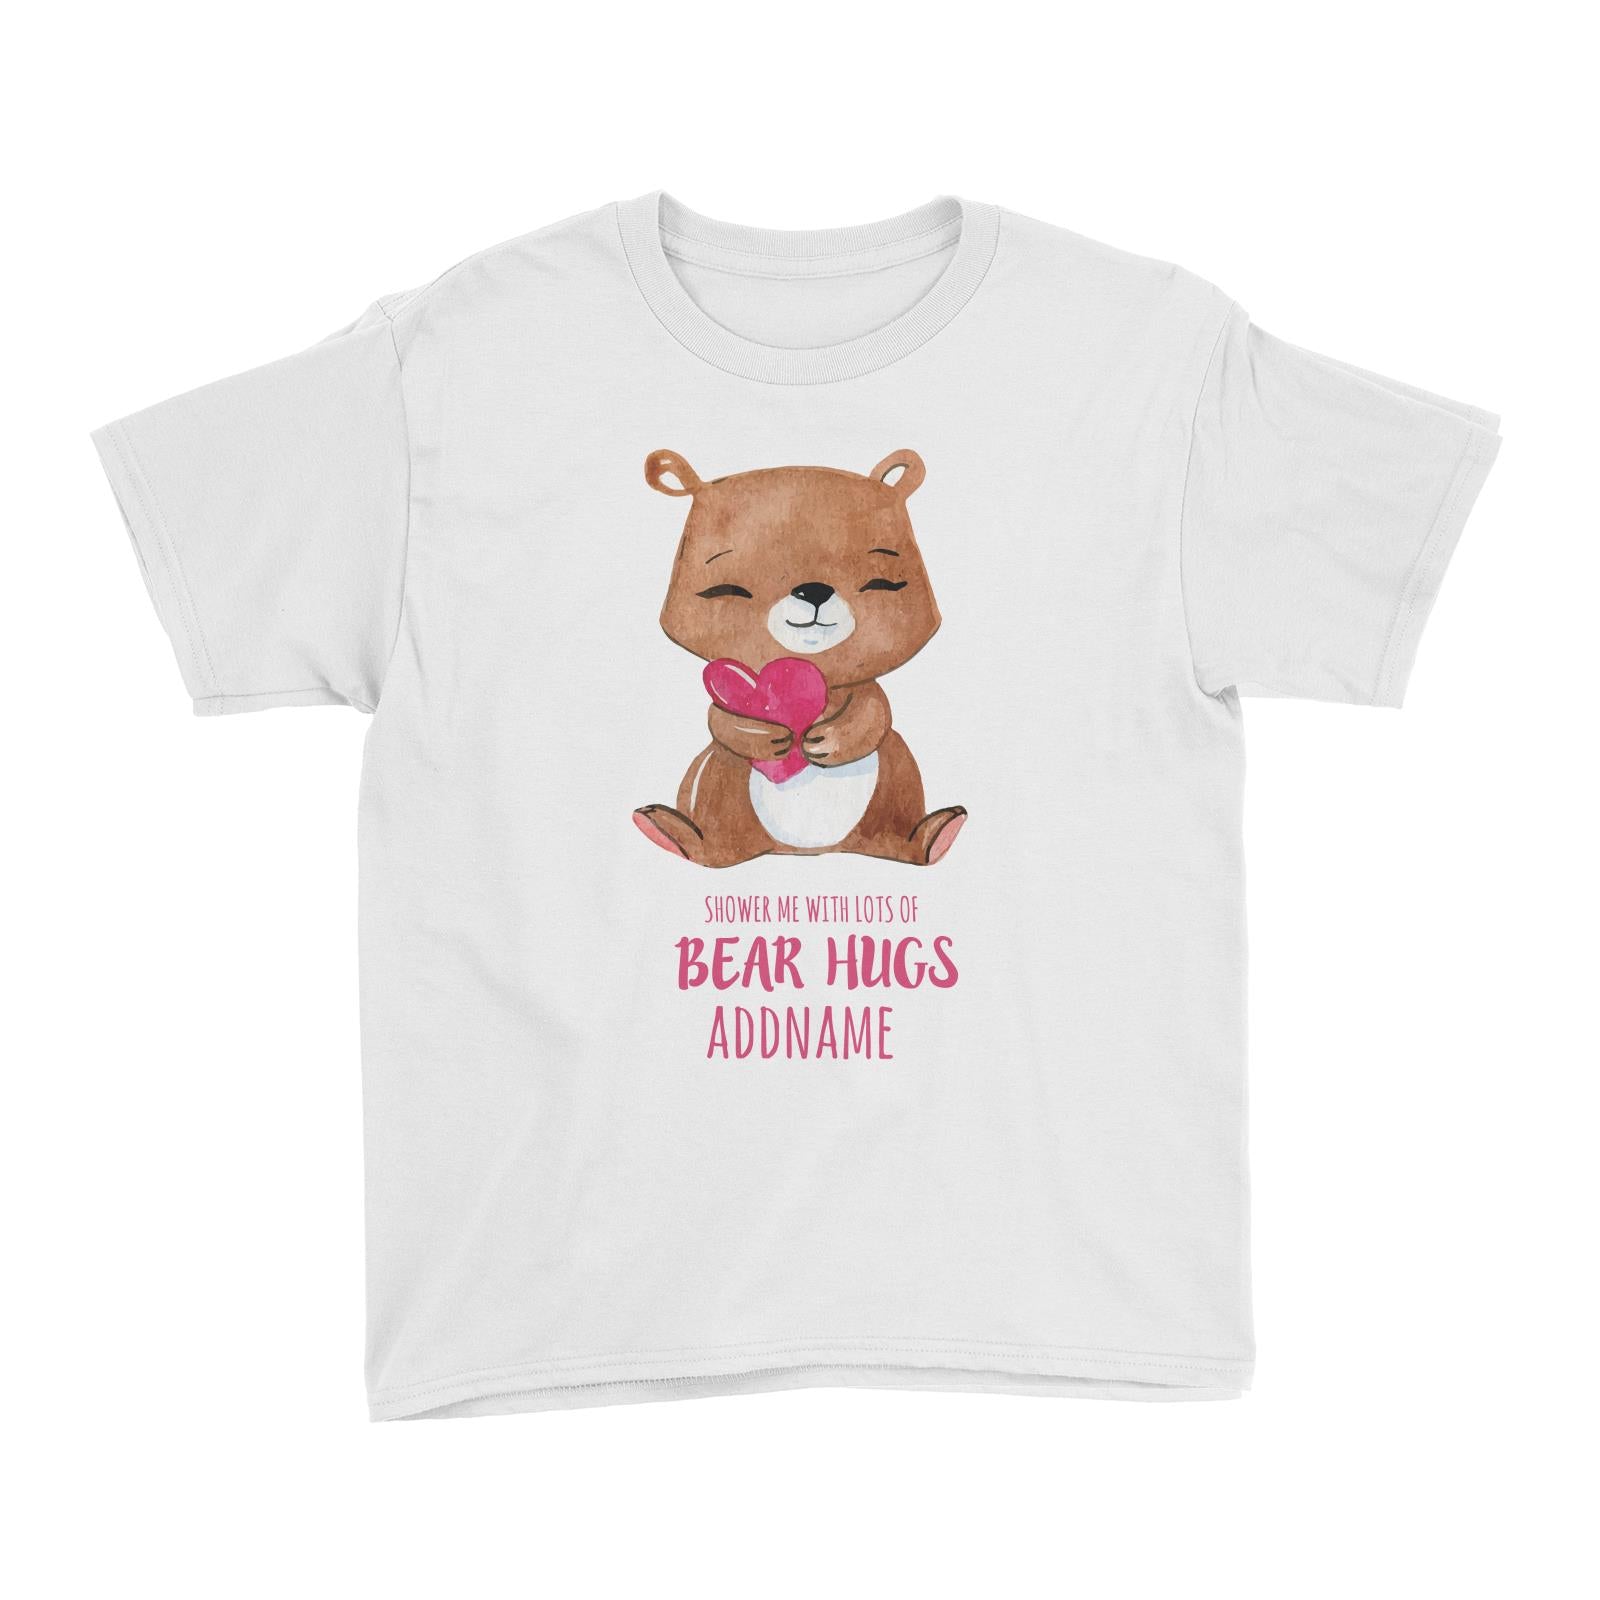 Shower Me With Lots Of Bear Hugs White Kid's T-Shirt